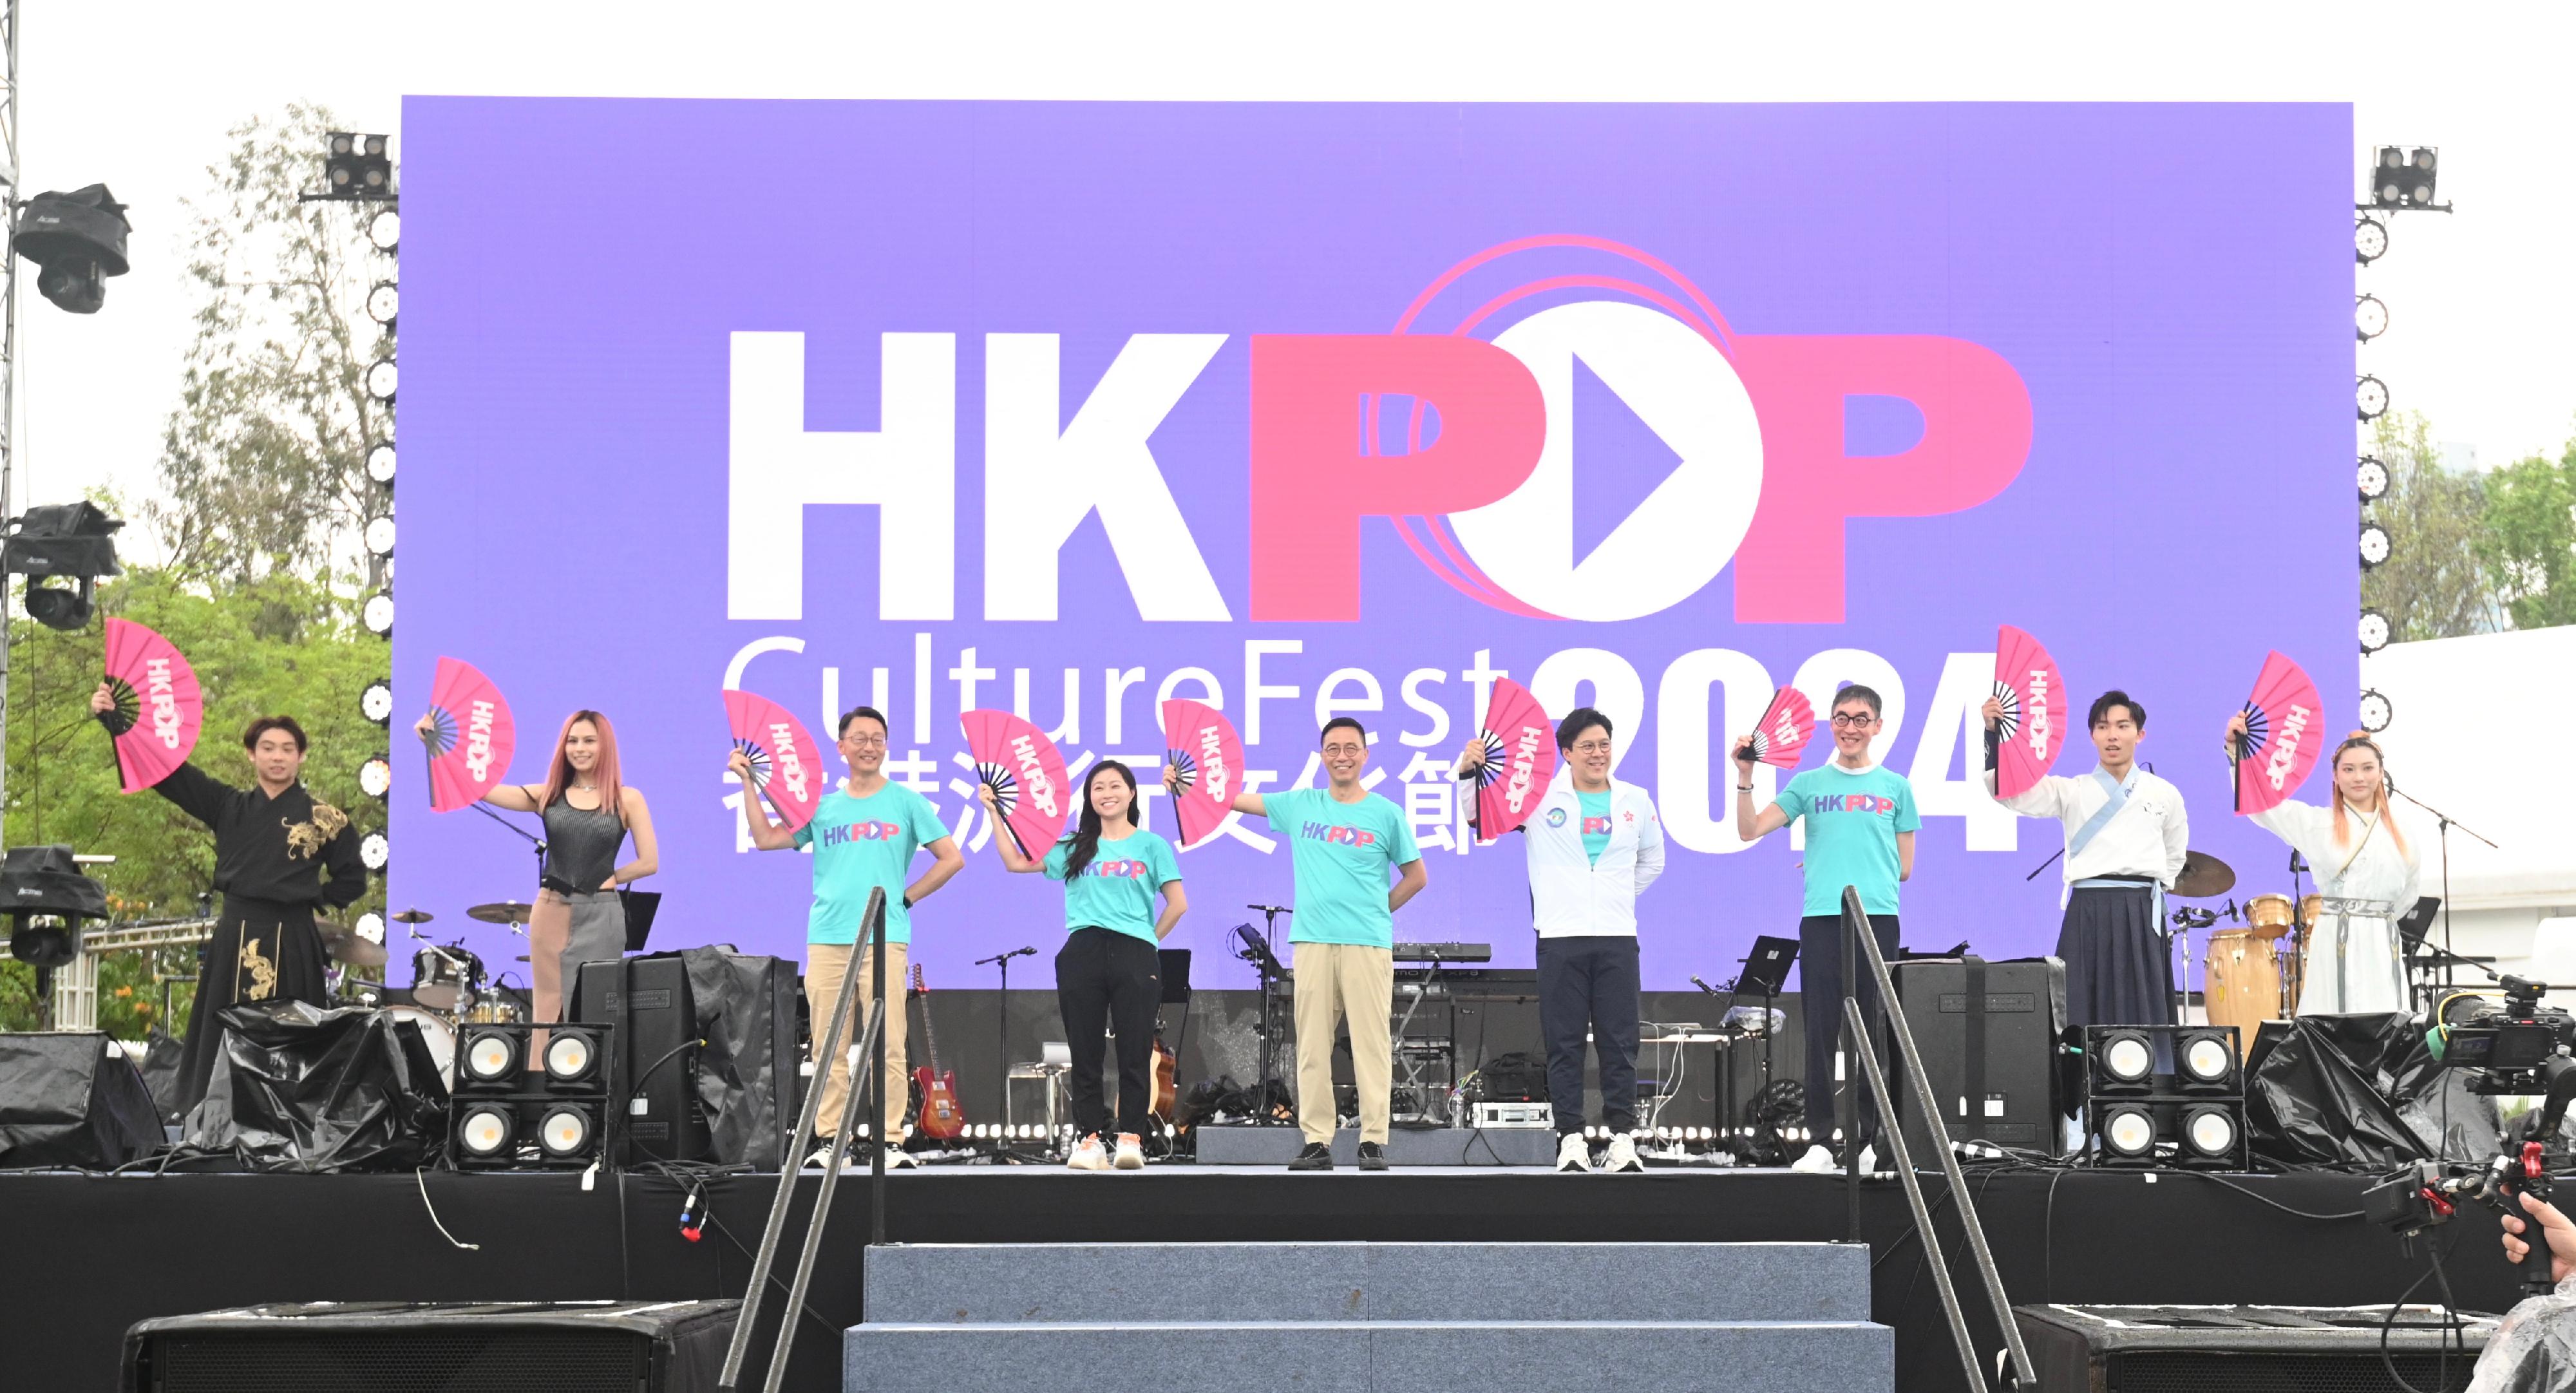 The second Hong Kong Pop Culture Festival opens today (April 6) at the central lawn of Victoria Park. Photo shows (from left) martial arts athlete Lau Chi-lung; singer Gin Lee; the Director of Leisure and Cultural Services, Mr Vincent Liu; Legislative Council Member Ms Joephy Chan; the Secretary for Culture, Sports and Tourism, Mr Kevin Yeung; Legislative Council Member Mr Kenneth Fok; the Chairman of the Museum Advisory Committee, Professor Douglas So; and martial arts athletes Samuei Hui and Lydia Sham at the opening ceremony.
